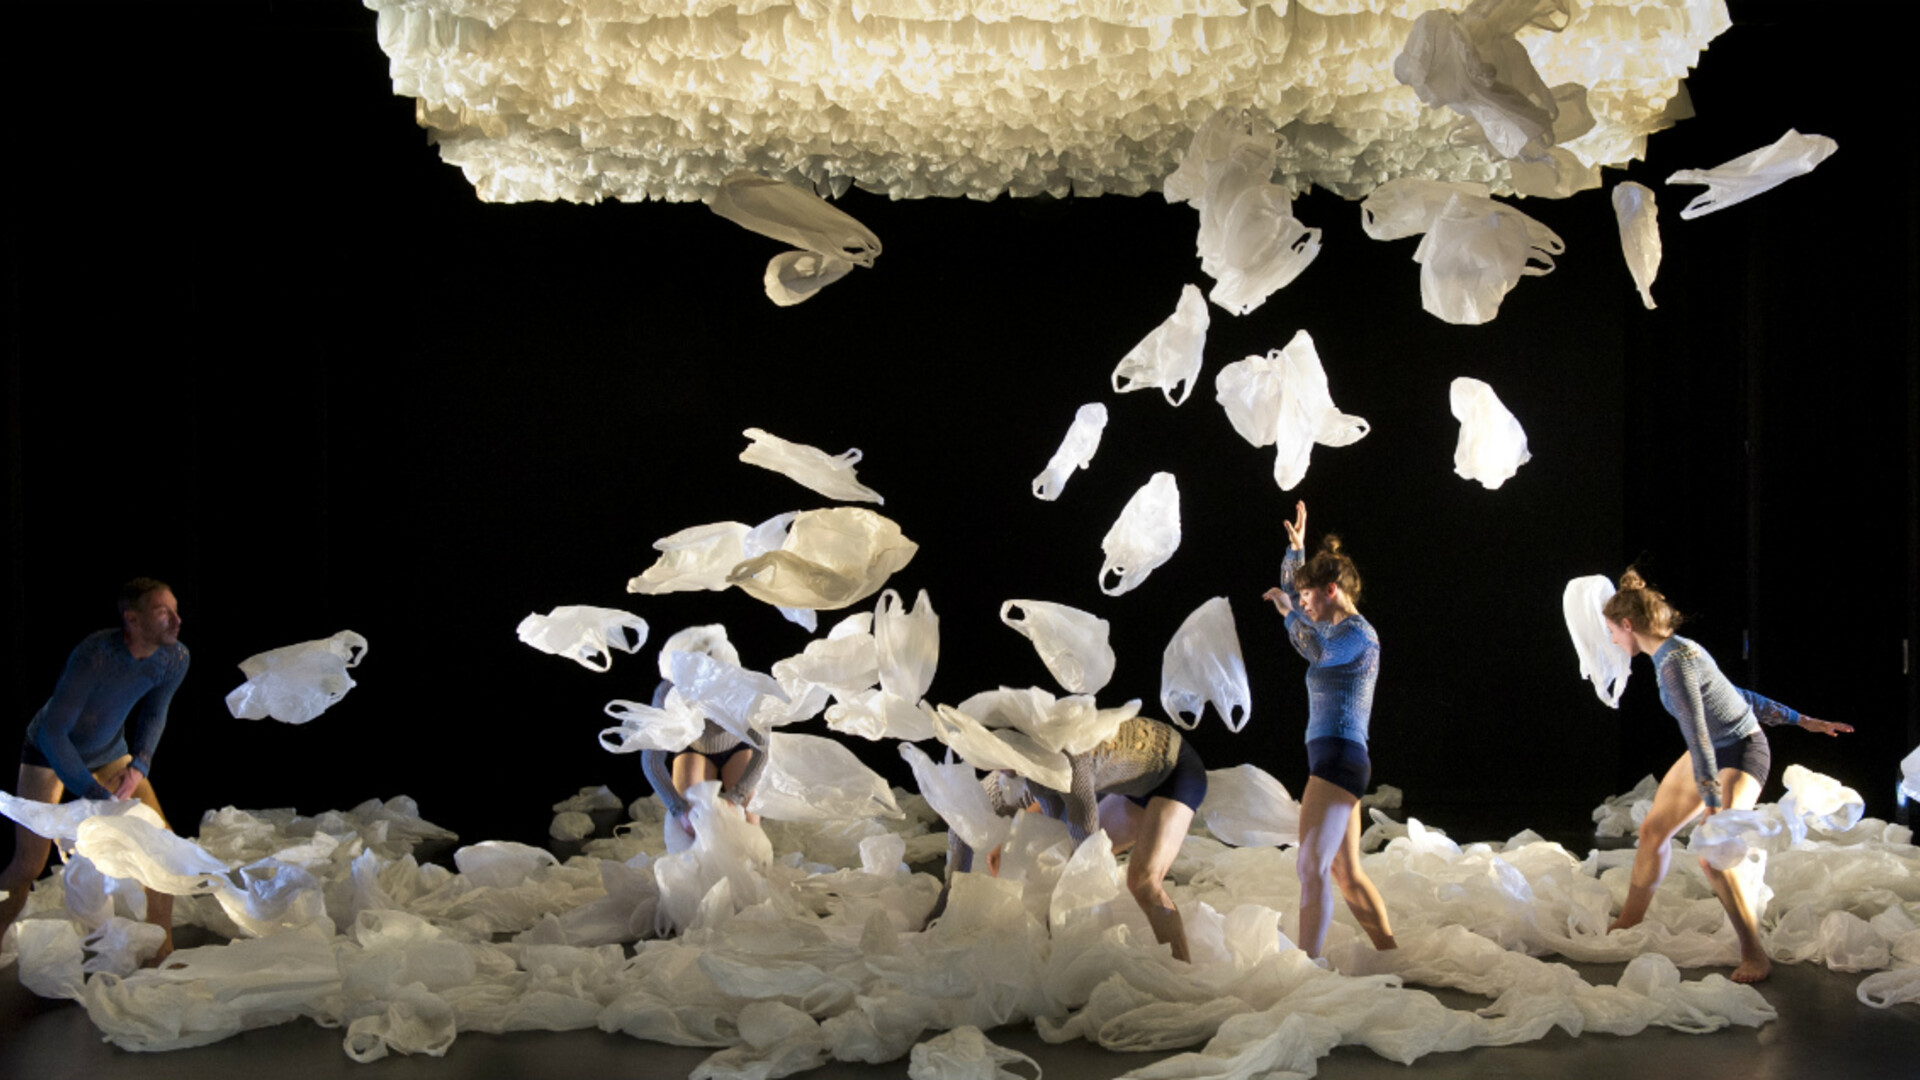 Dancers throw plastic bags into the air.